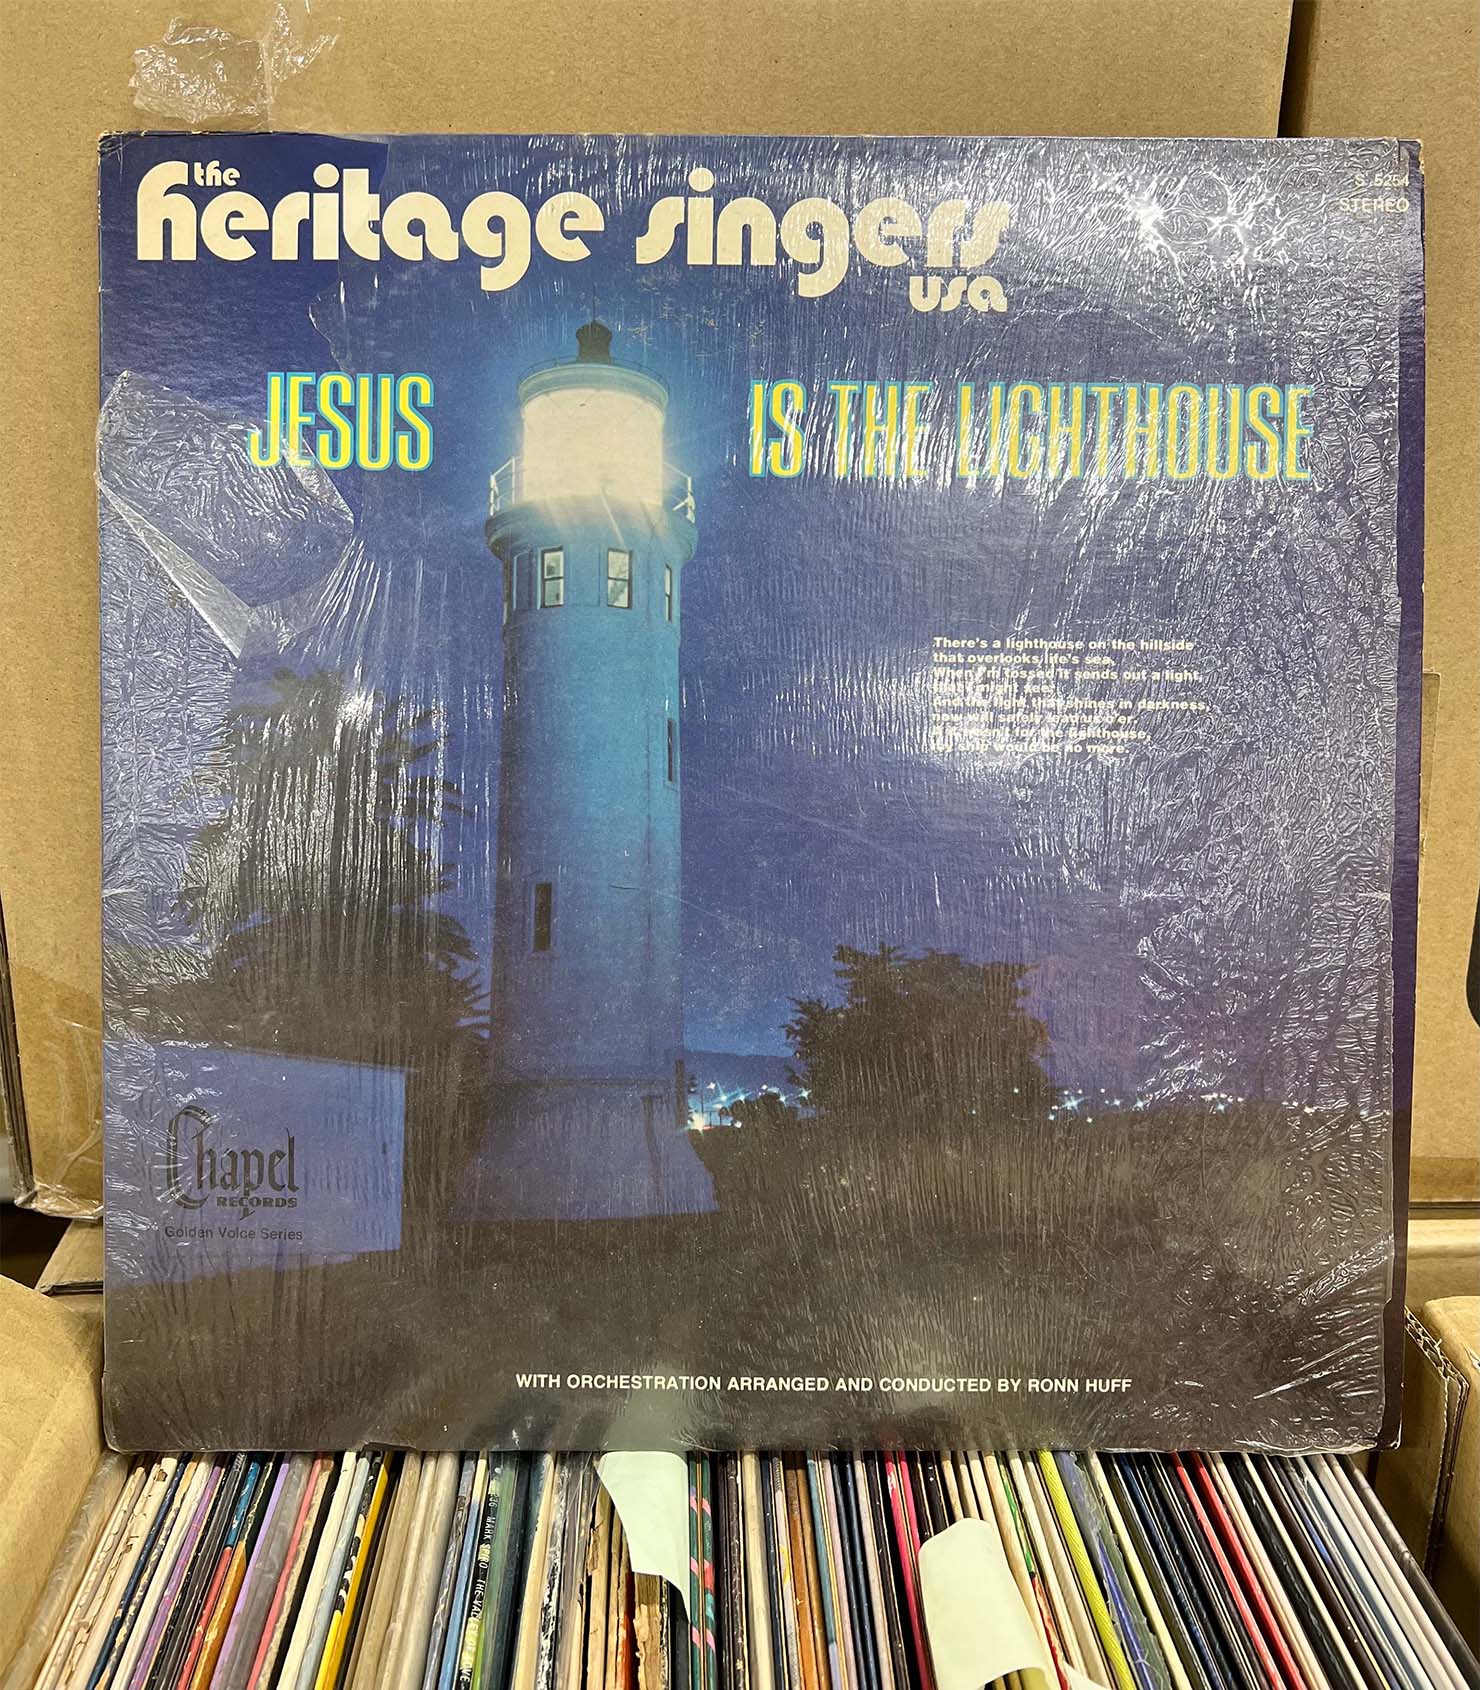 The Heritage Singers USA「Keep Your Hand in the Lord」（1974年）